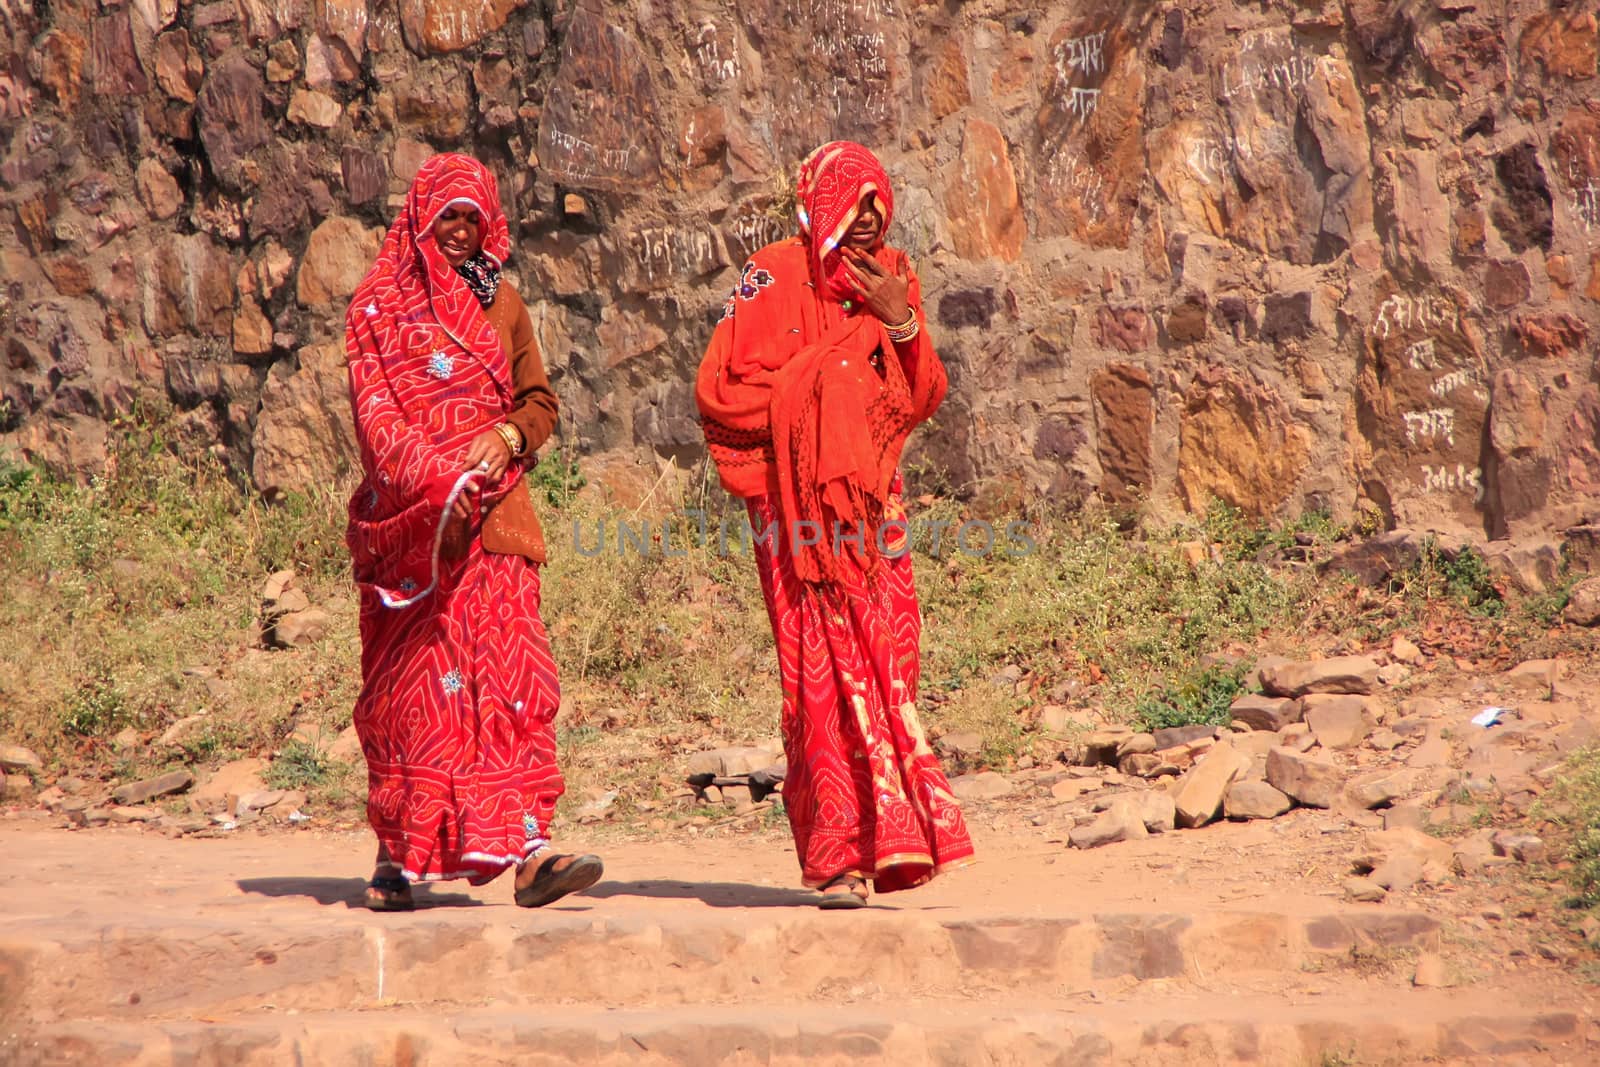 Indian women in colorful saris walking at Ranthambore Fort, Indi by donya_nedomam